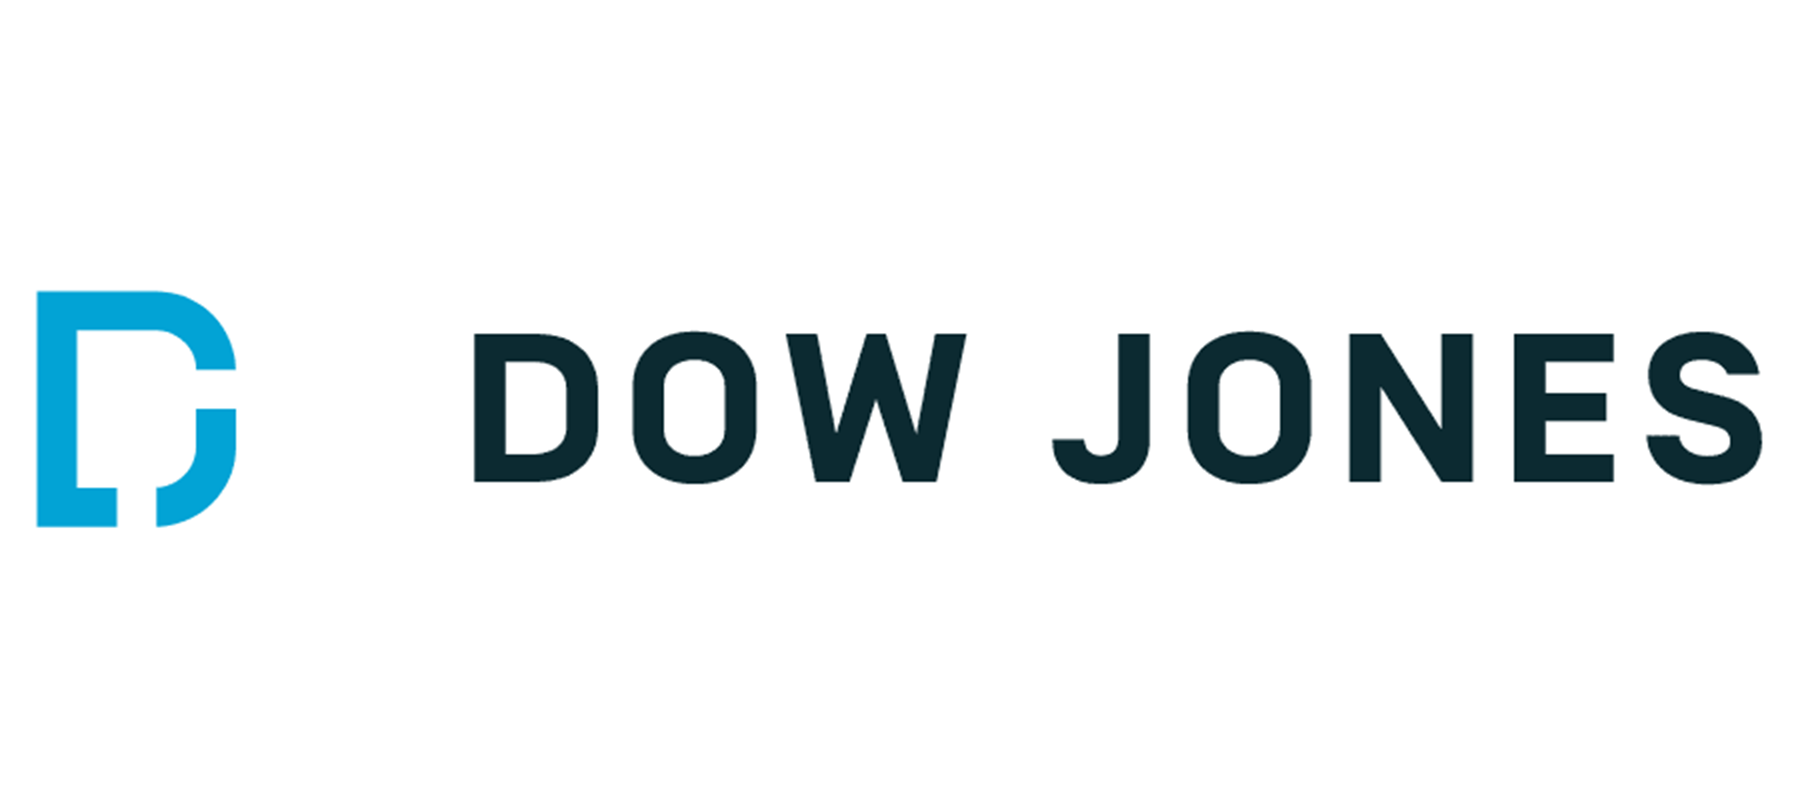 Dow Jones appoints global agency partners to accelerate media and creative campaigns